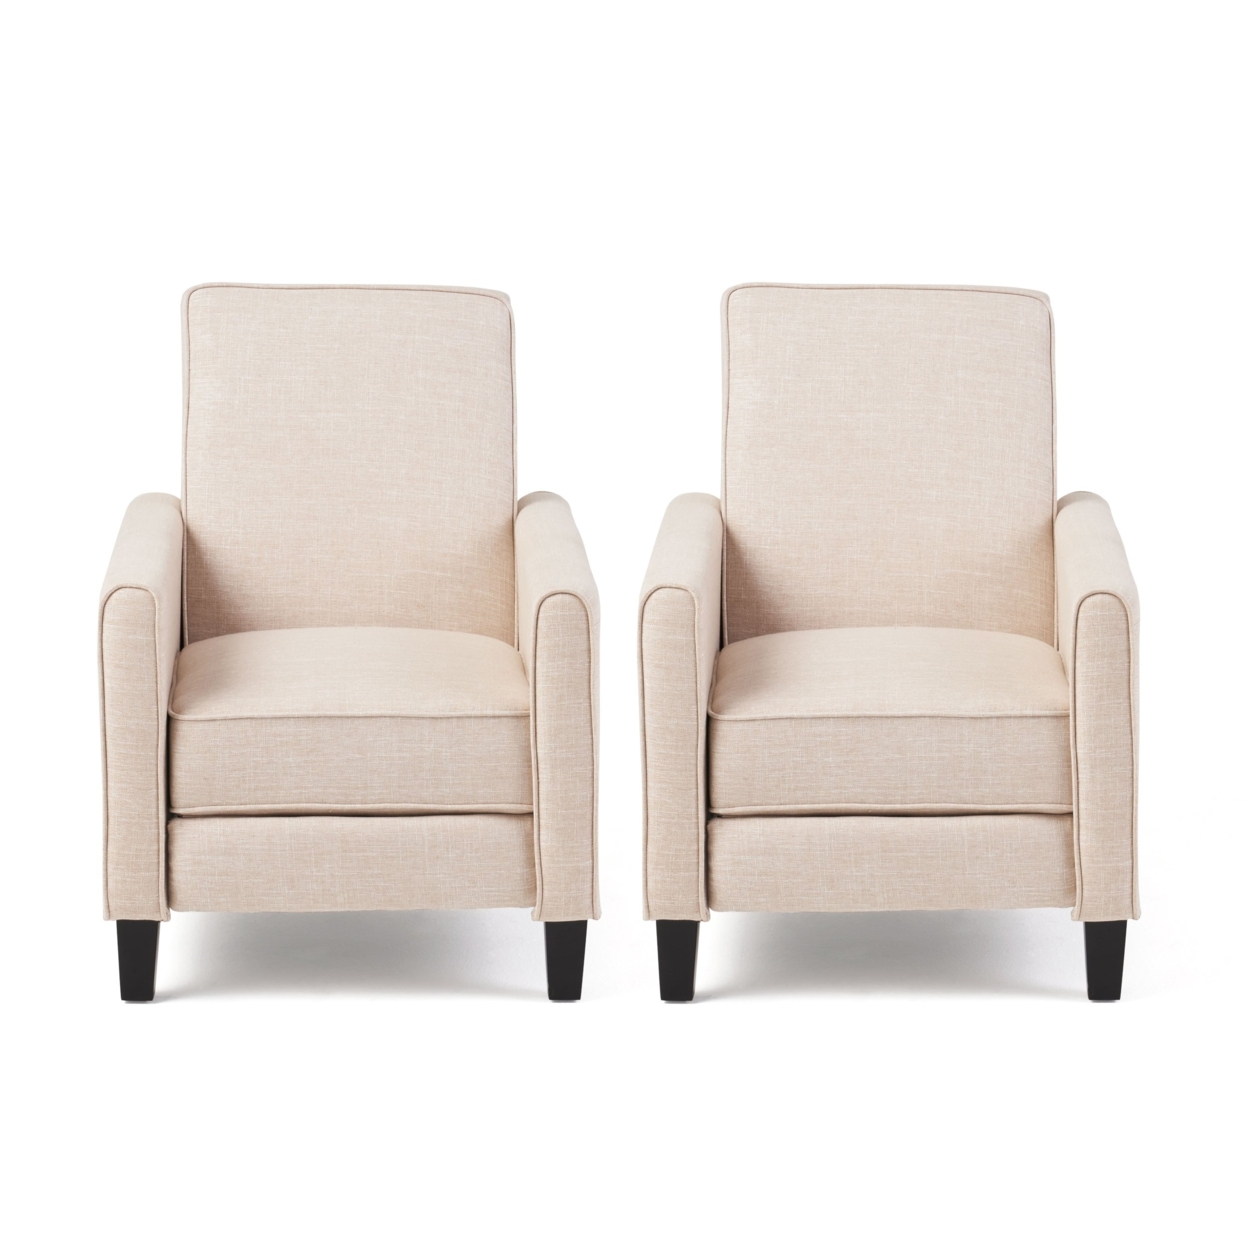 Lucas Contemporary Fabric Recliner (Set Of 2) - Wheat